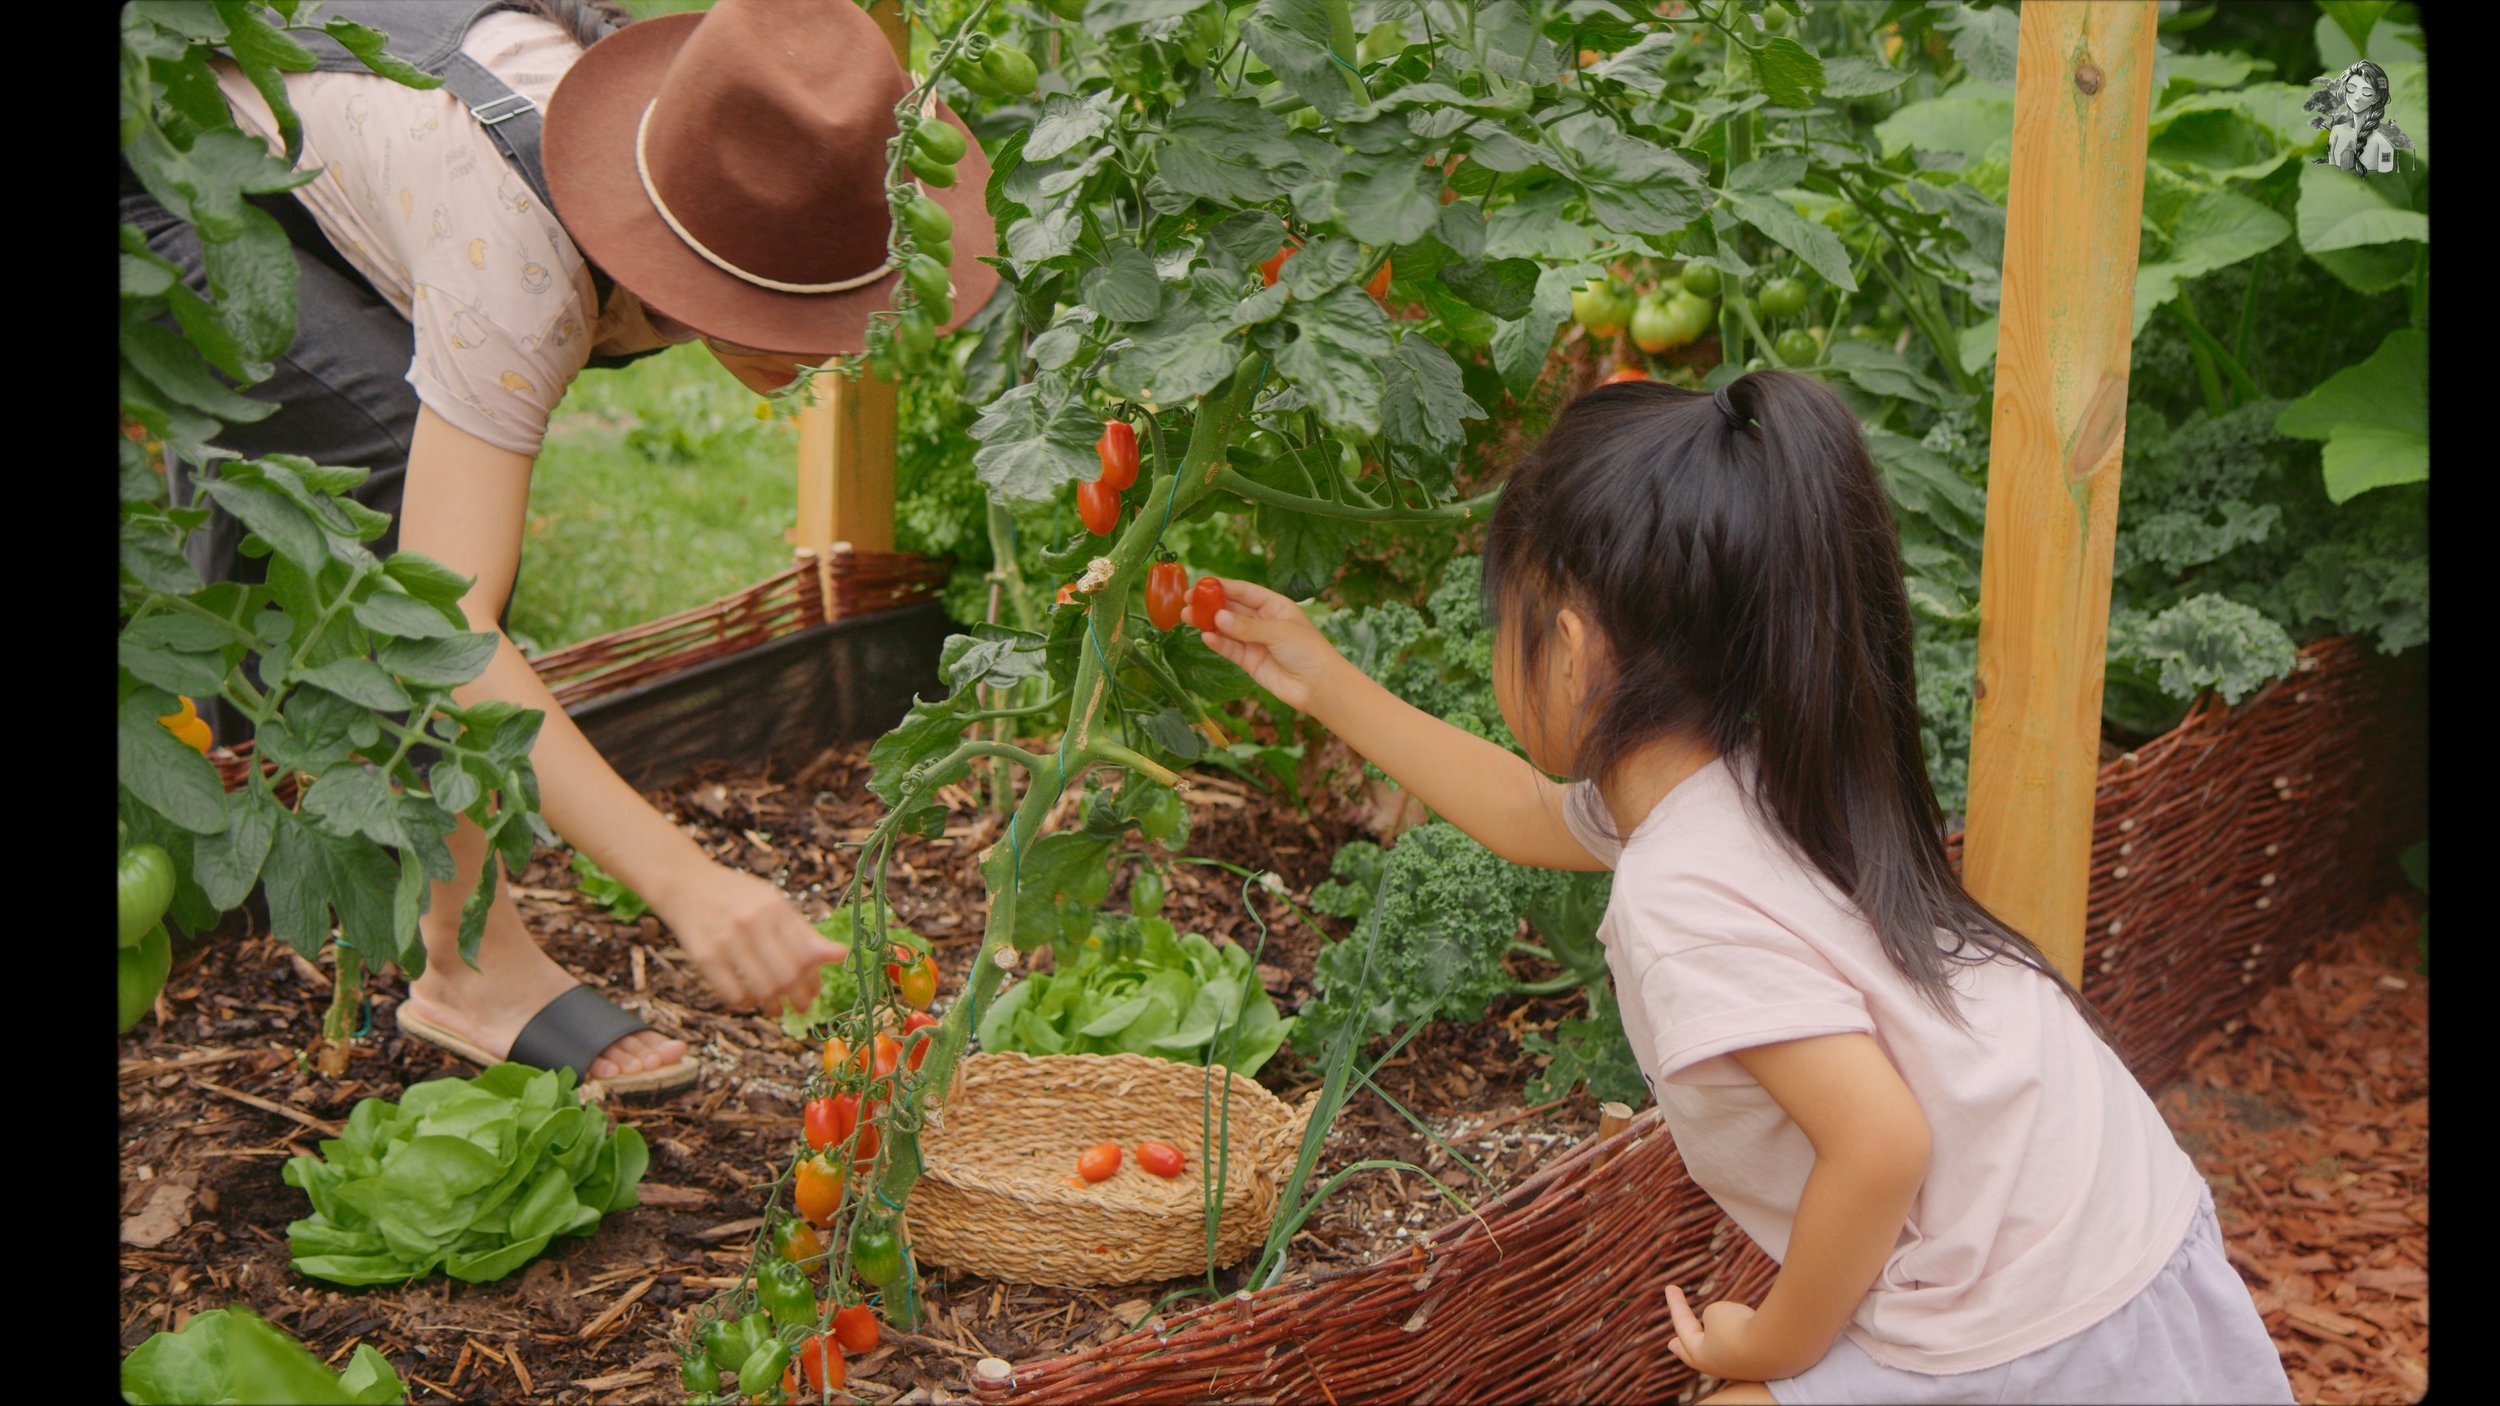 Everything About Growing Tomatoes - Her86m2 _1.224.1.jpg